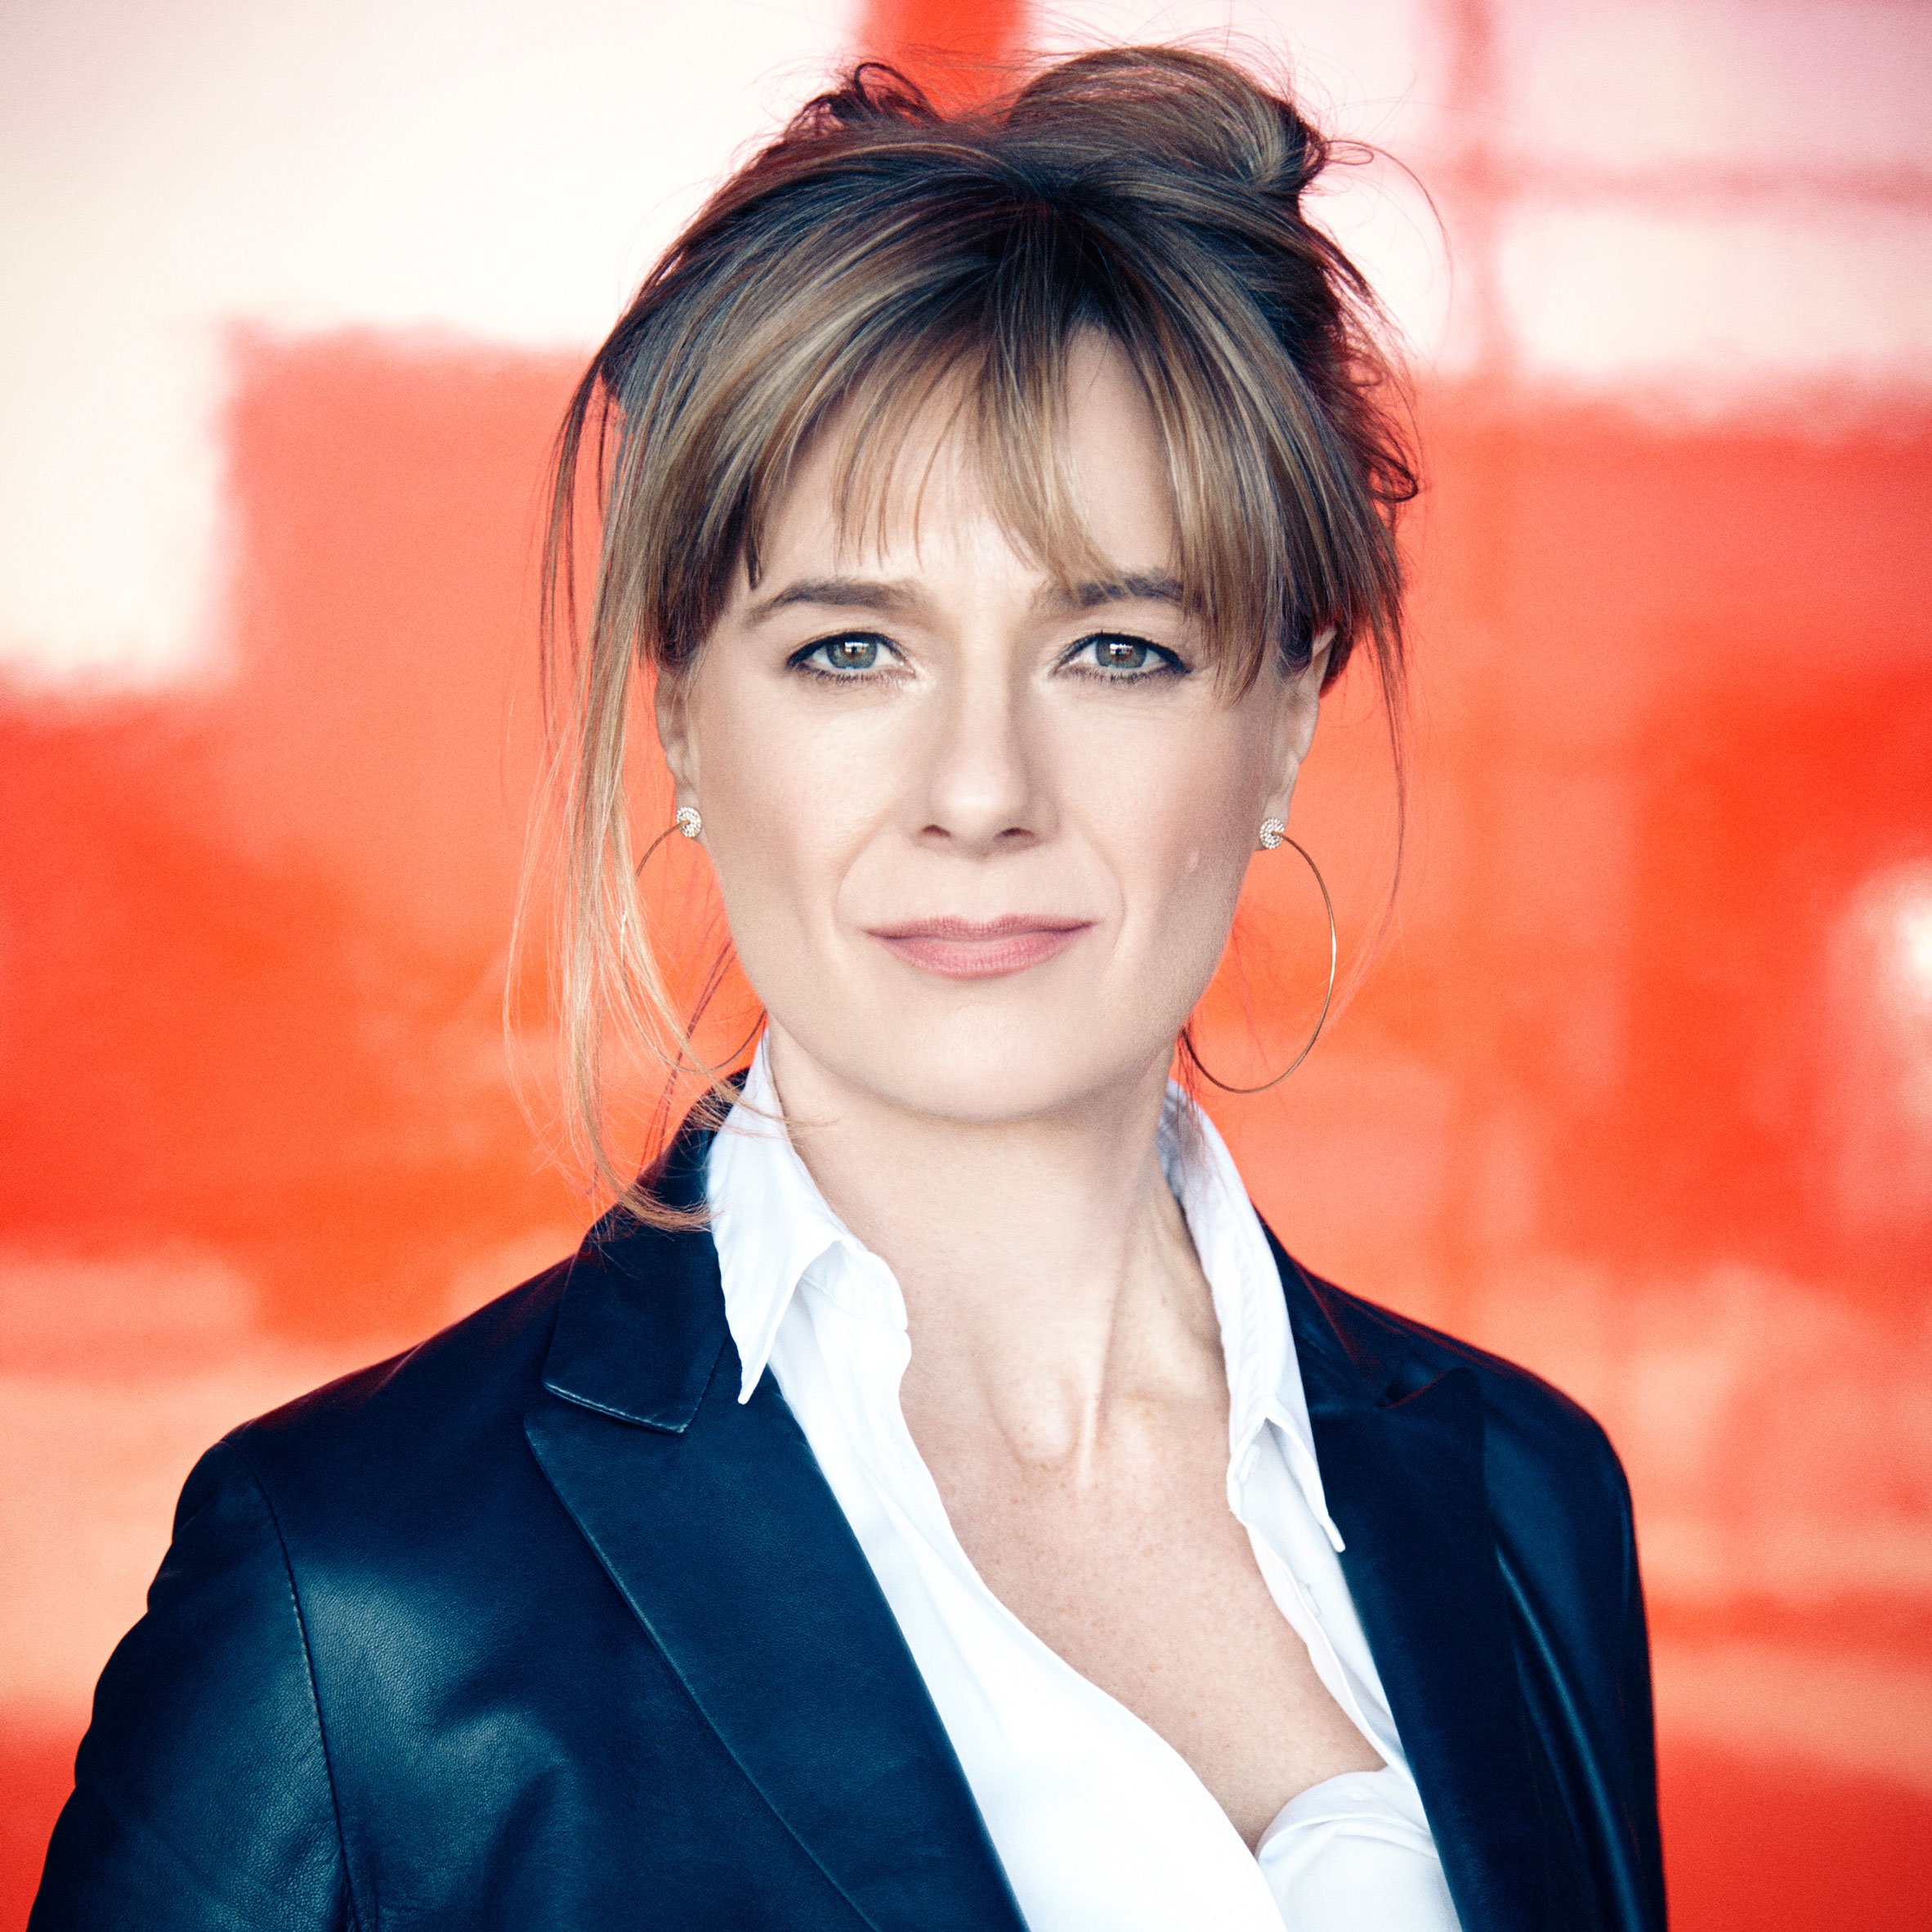 Competition: win tickets to New London Architecture's Annual Lecture with Amanda Levete